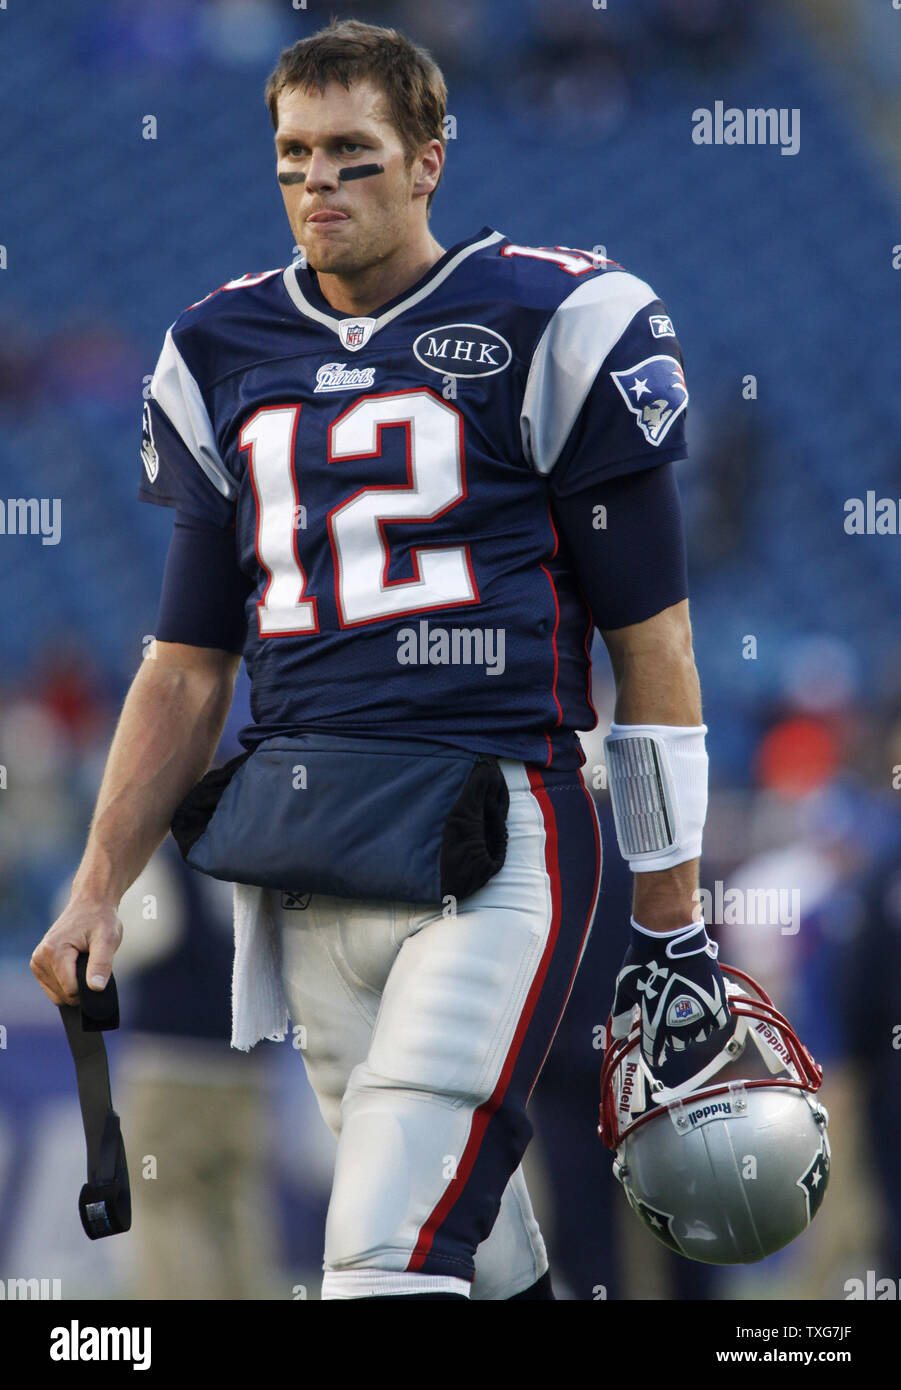 New England Patriots quarterback Tom Brady walks the field while warming up with his team before taking on the New York Giants at Gillette Stadium in Foxboro, Massachusetts on November 6, 2011.    UPI/Matthew Healey Stock Photo